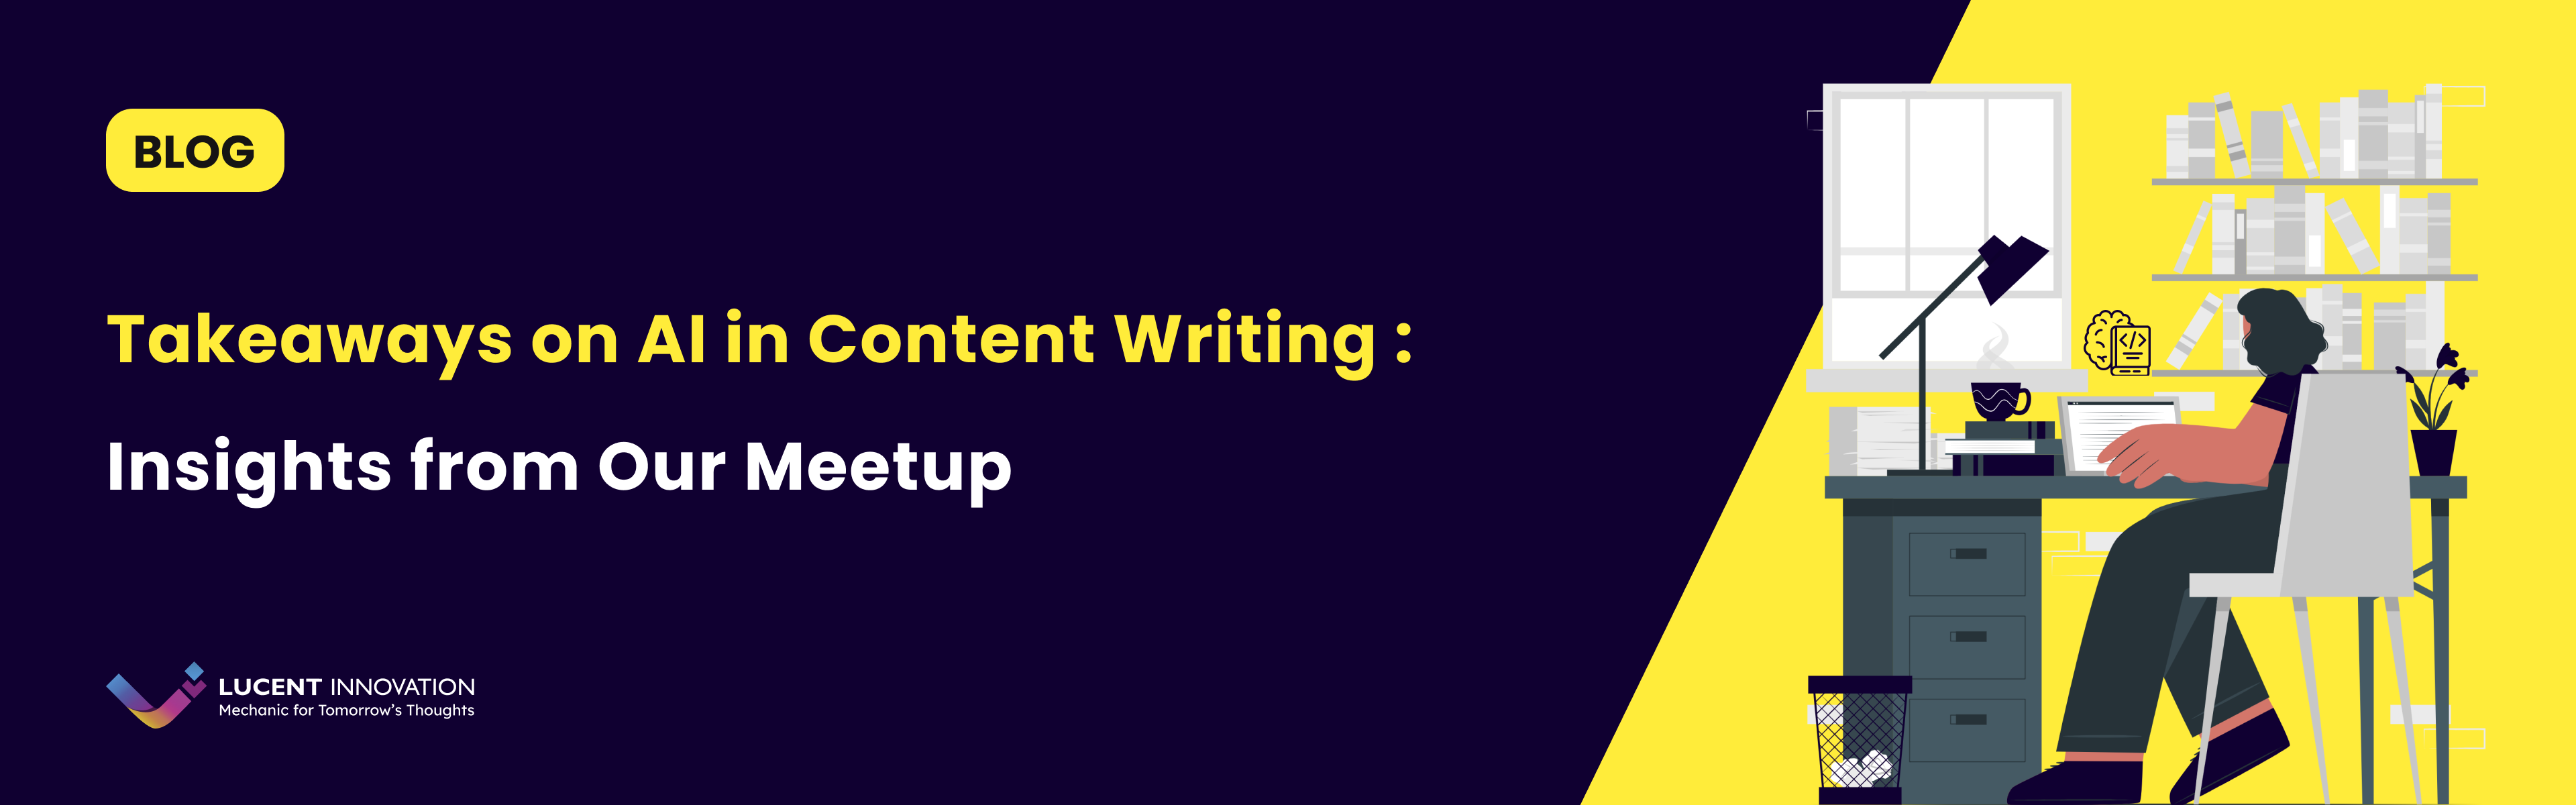 AI in Content Writing: Meetup Takeaways